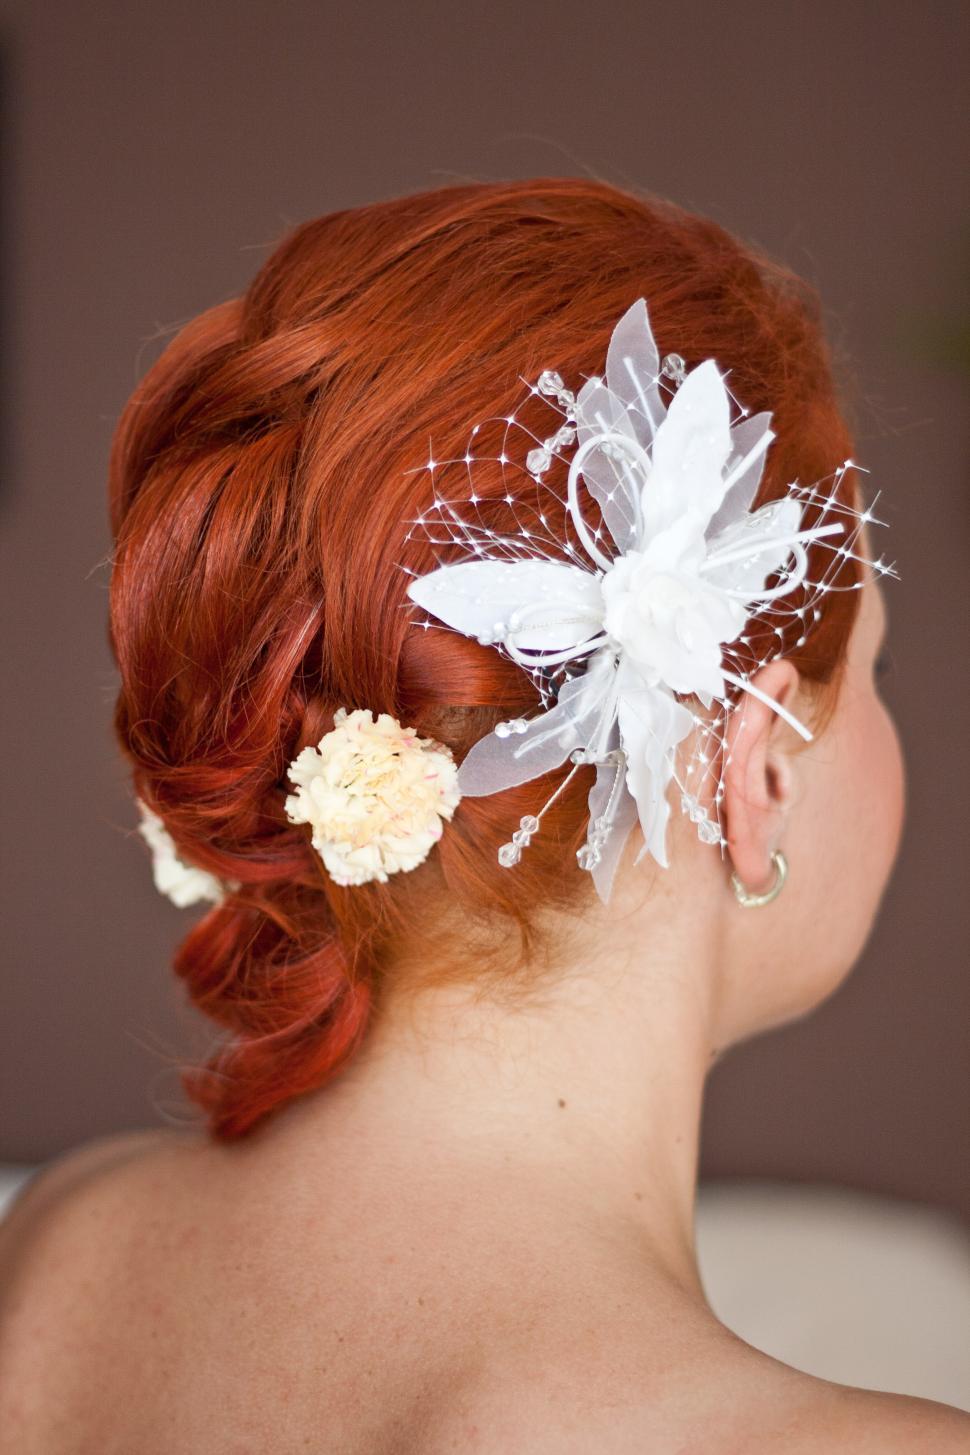 Free Image of Woman With Red Hair and Flower in Hair 